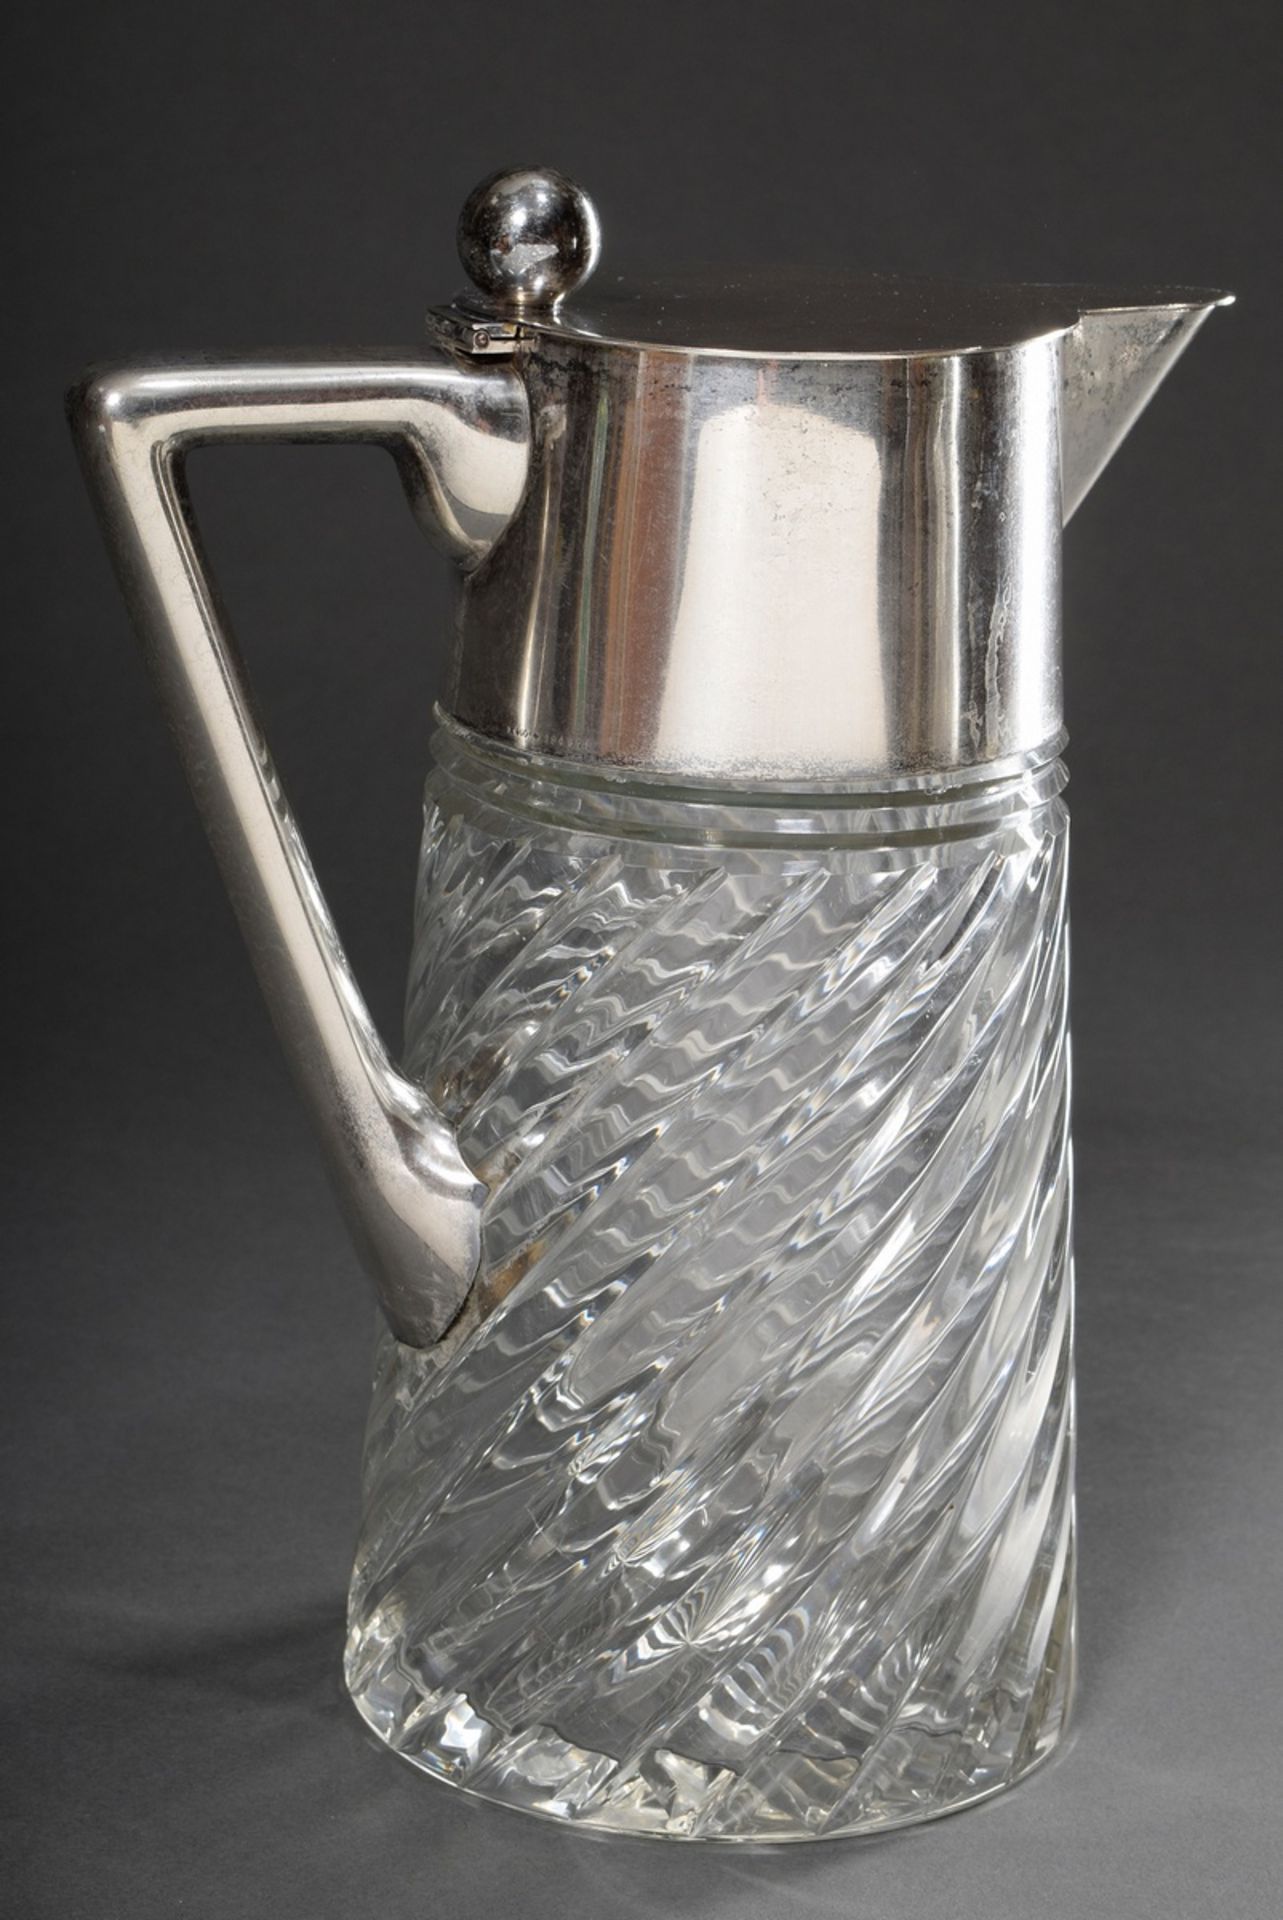 Large crystal juice jug "Kalte Ente" (Cold Duck) with silver 800 mounting and grooved wall, Wilkens - Image 2 of 7